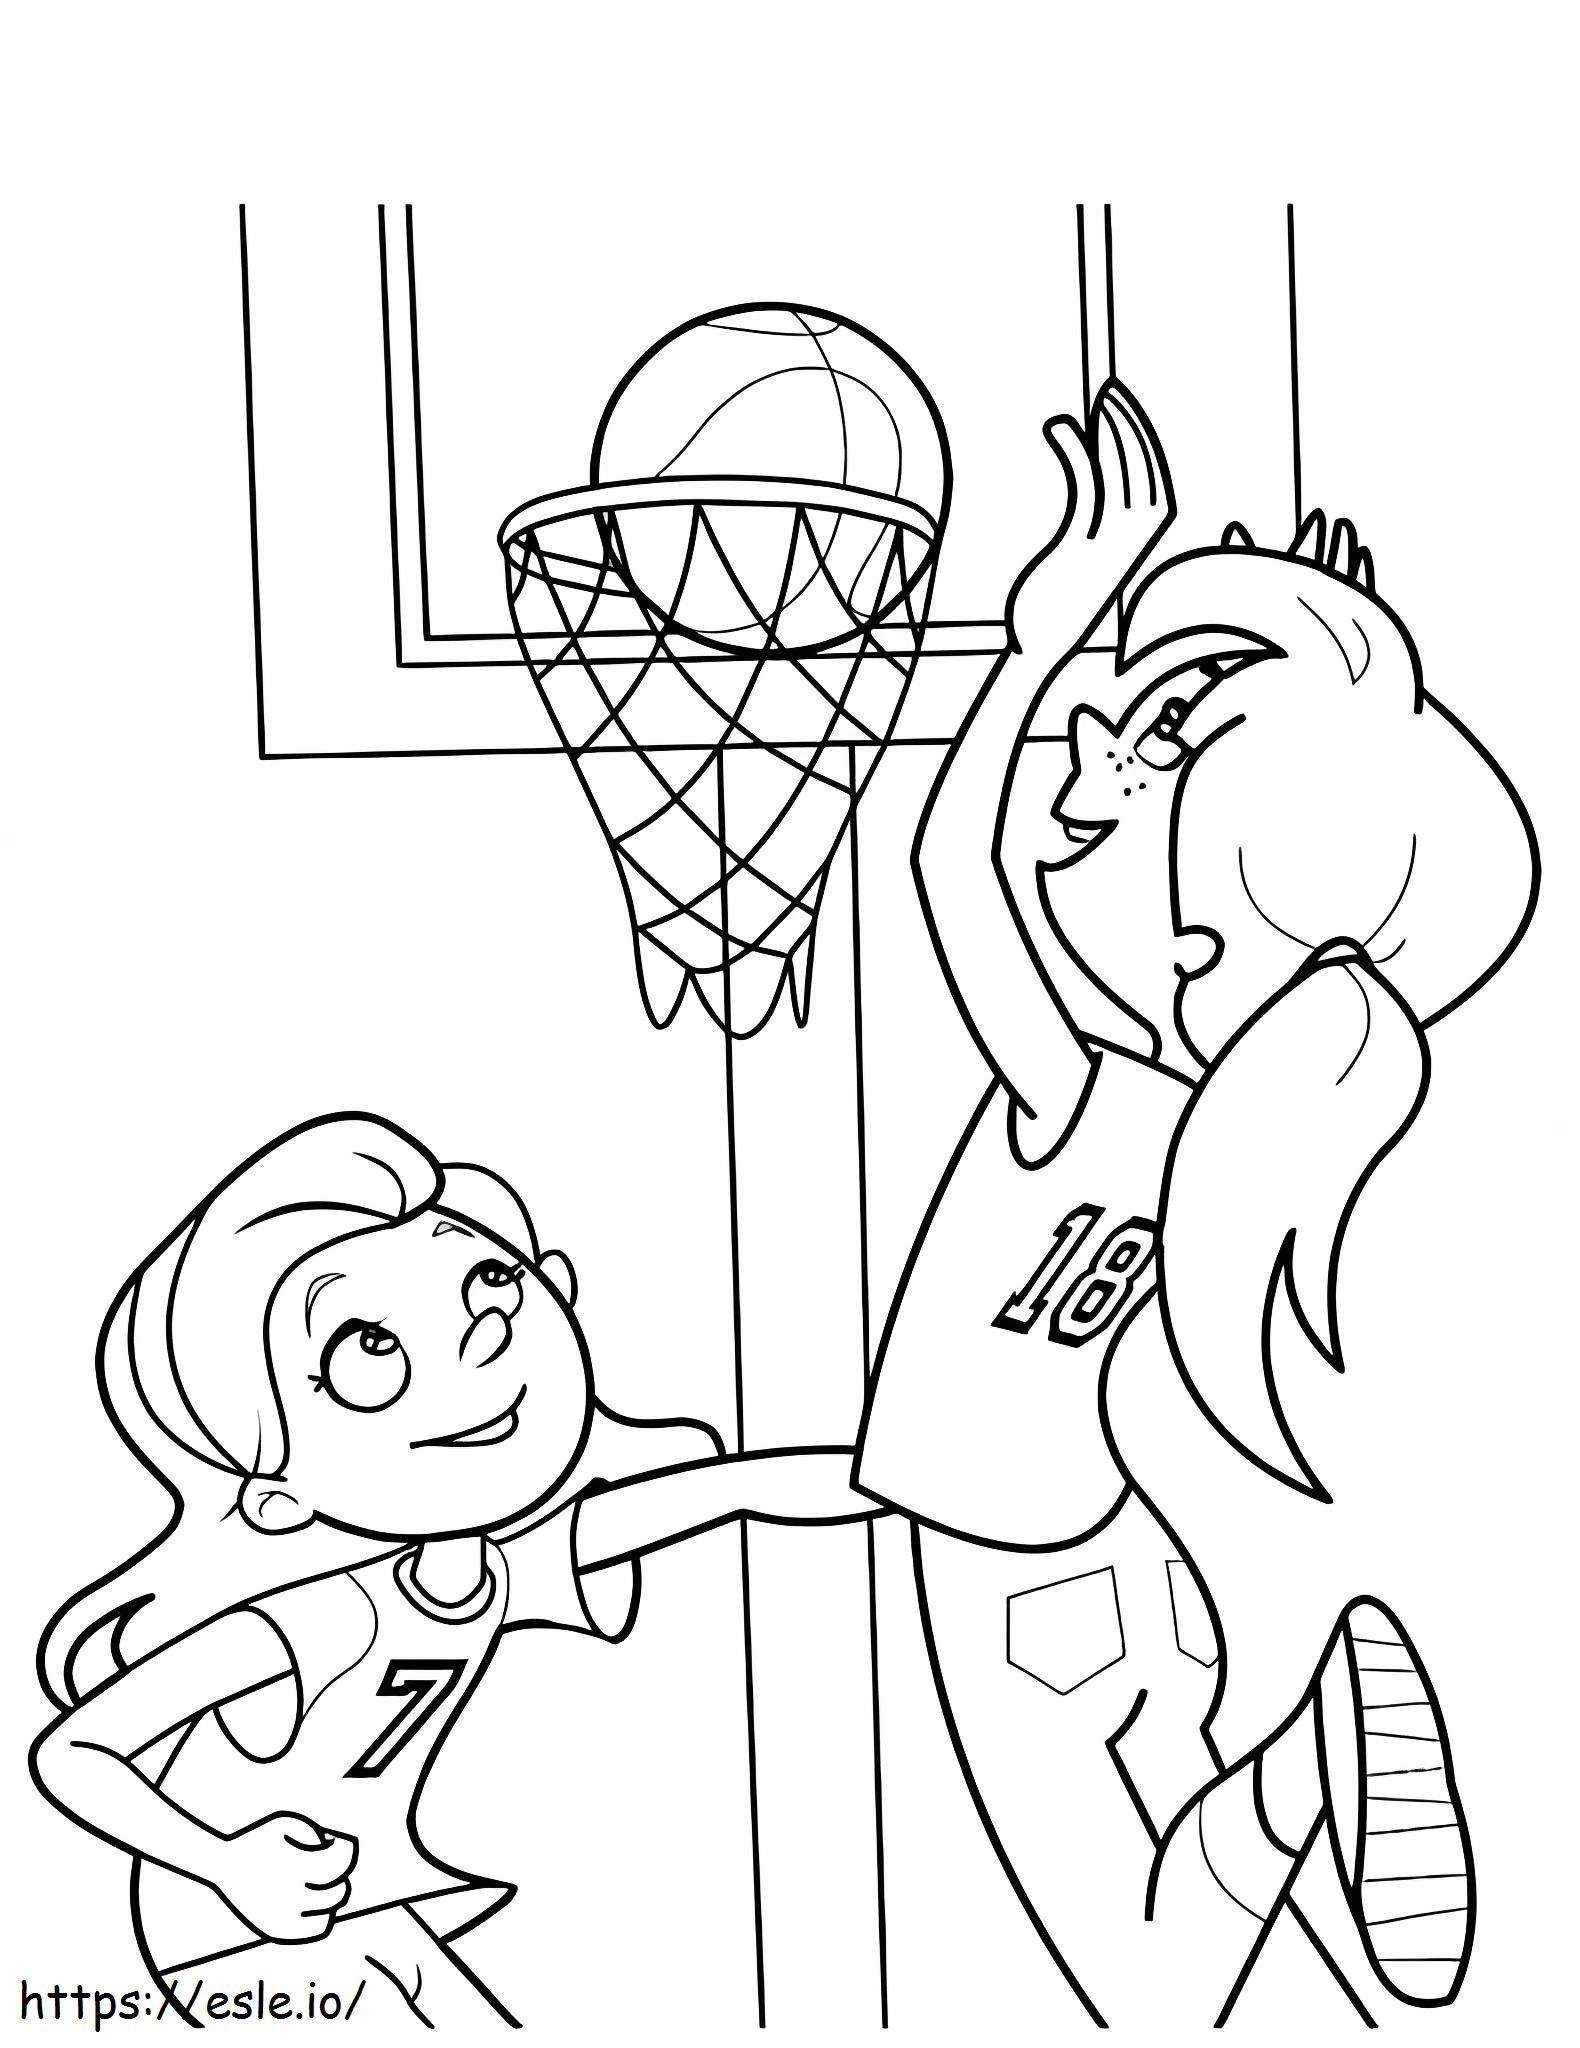 1559609256 Girls Playing Basketball A4 coloring page